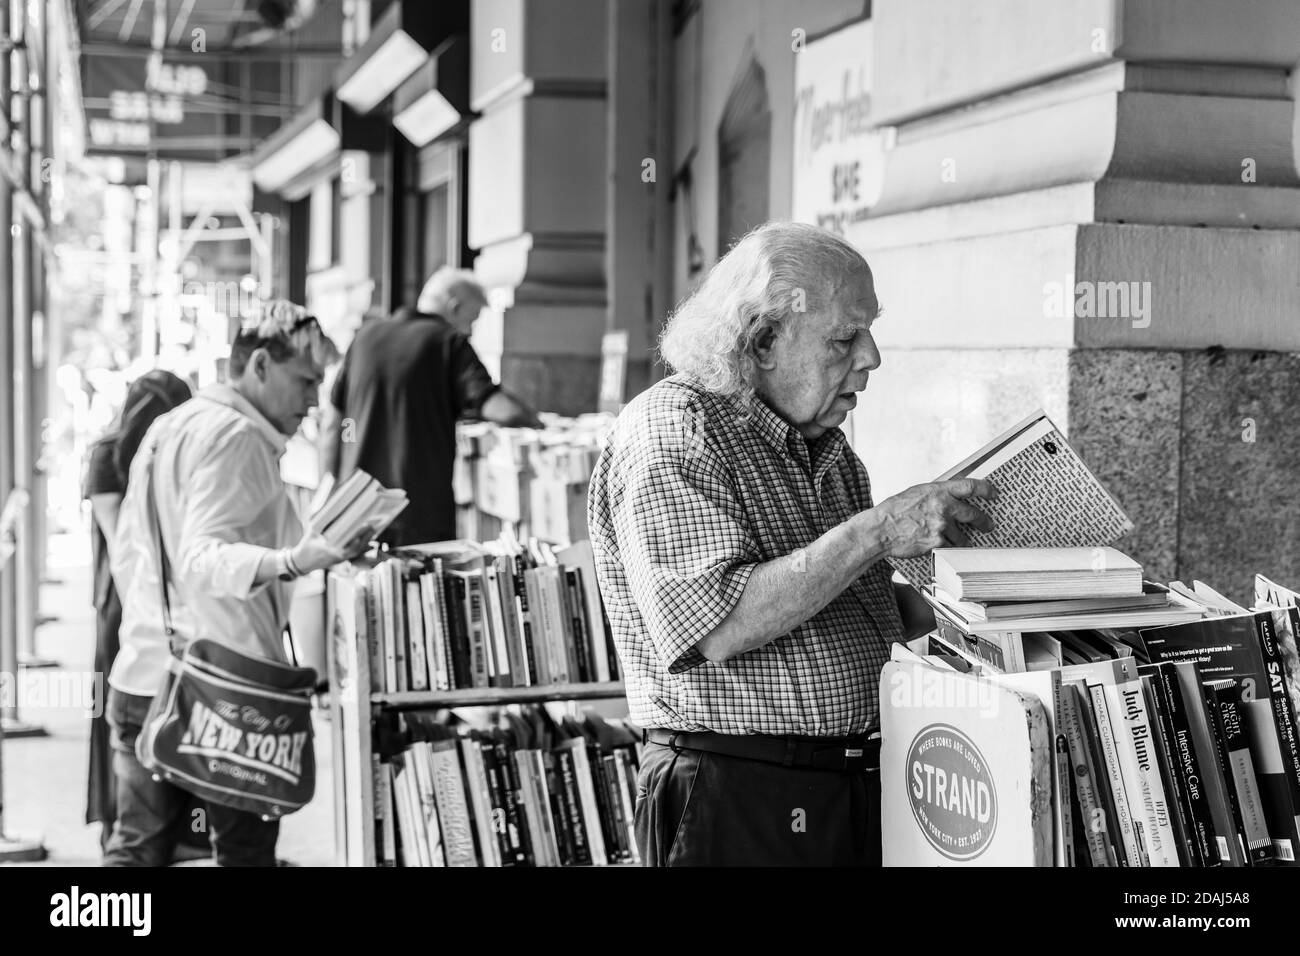 New York, USA - Sep 16, 2017: Black and white image of Strand Book Store in Manhattan. A gray-haired old man chooses a book to buy Stock Photo